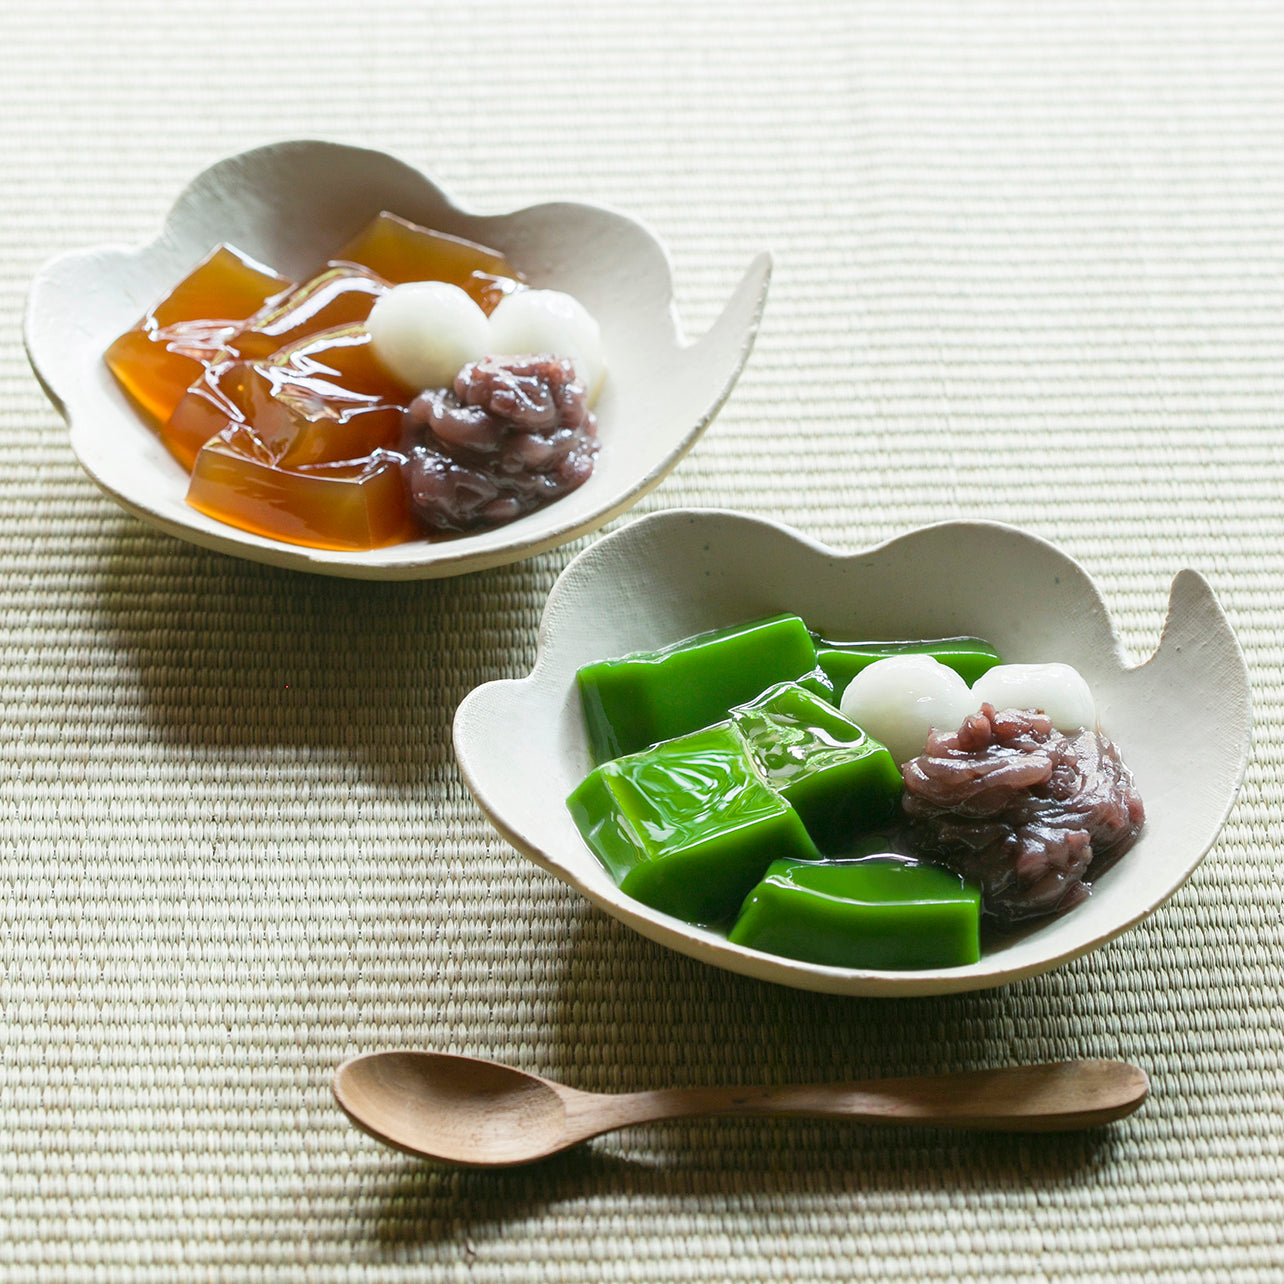 Assortment of 2 types of fresh green tea jelly [bamboo]